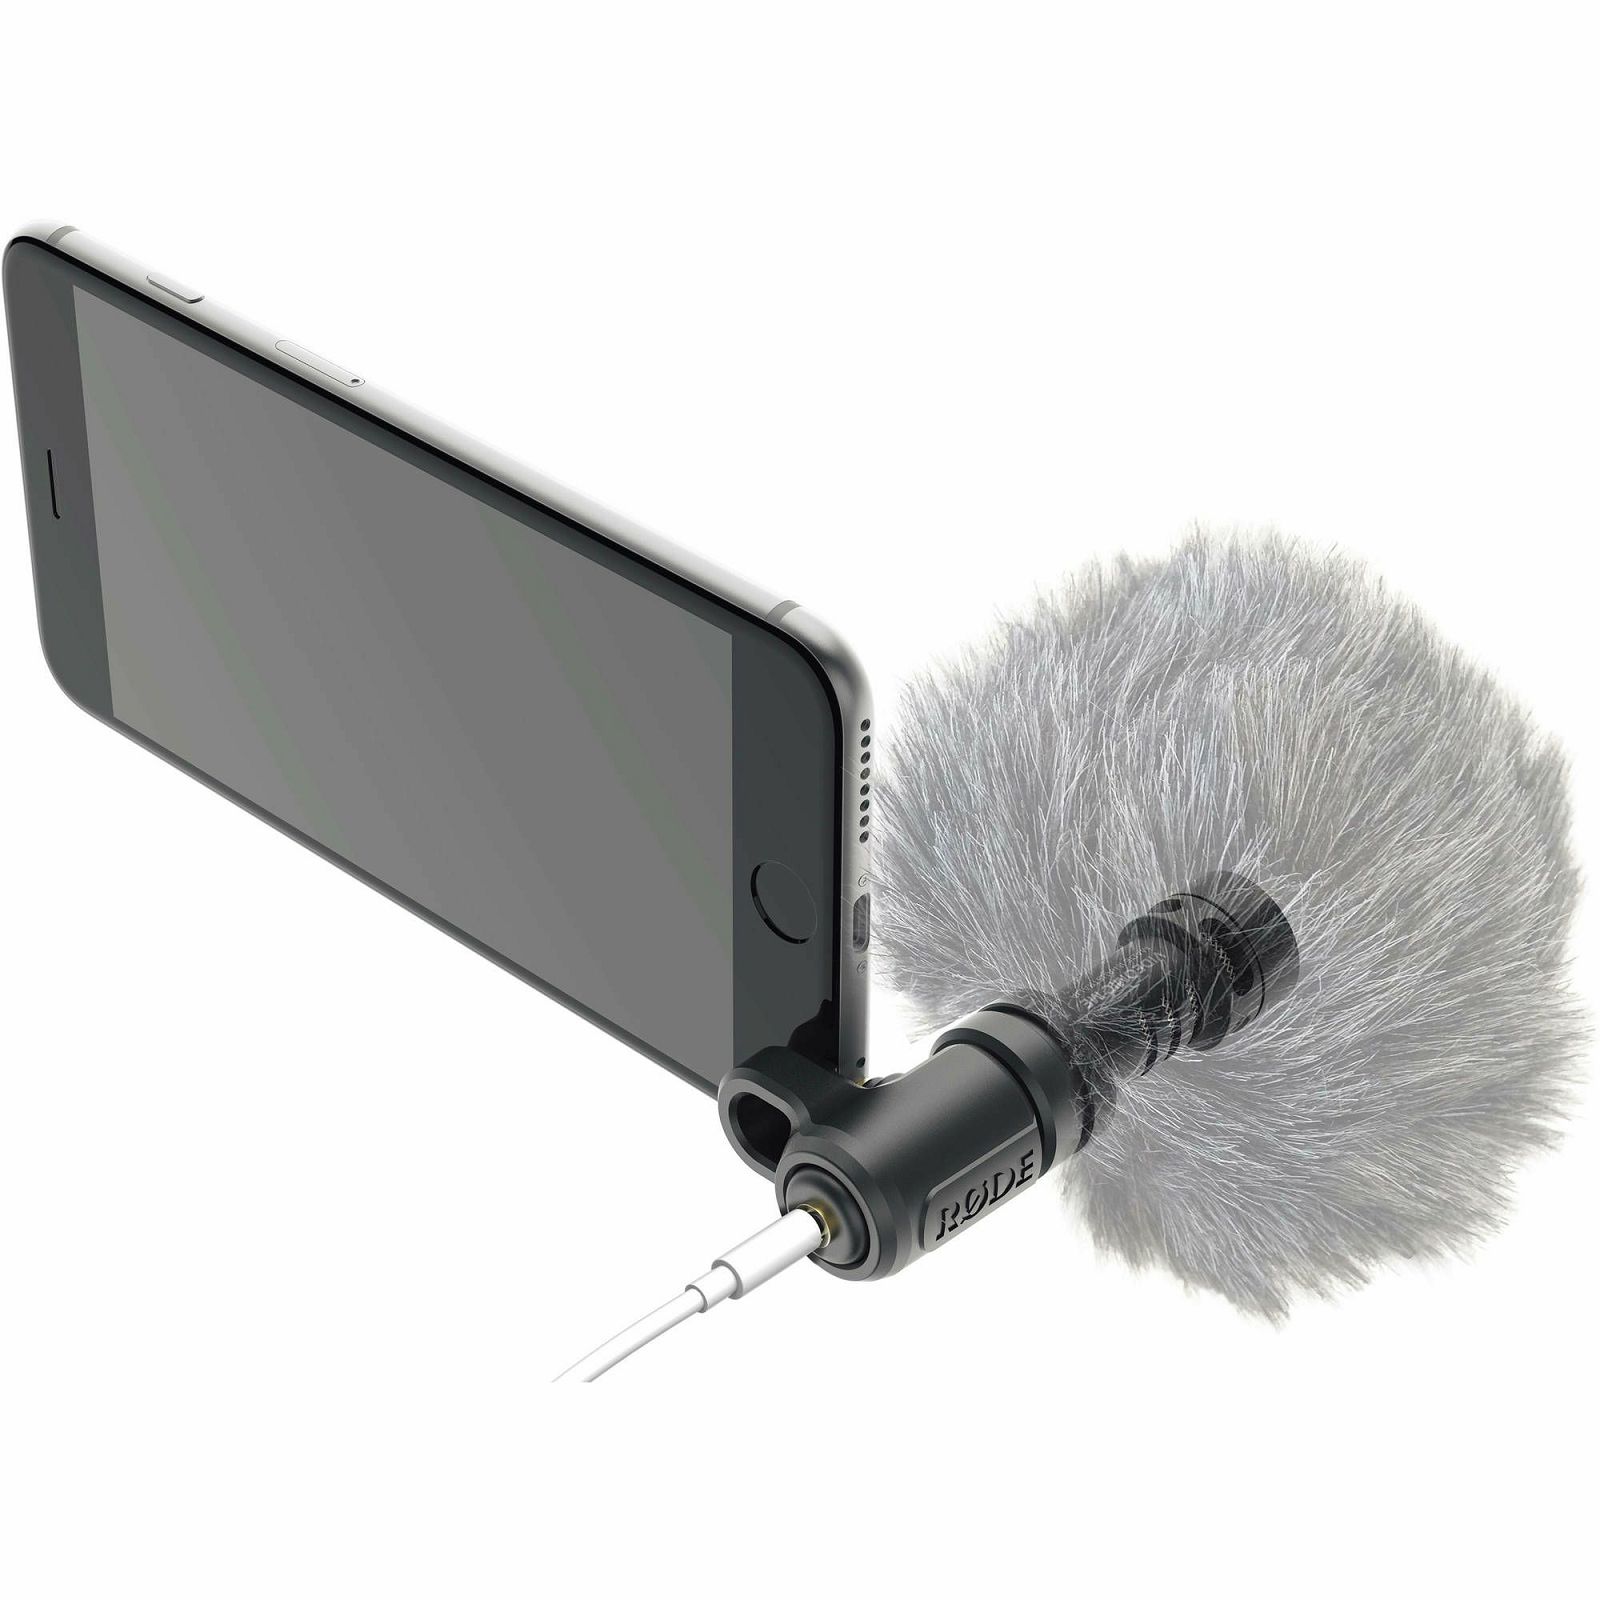 Rode VideoMic Me compact lightweight directional microphone for iPhone TRRS mikrofon